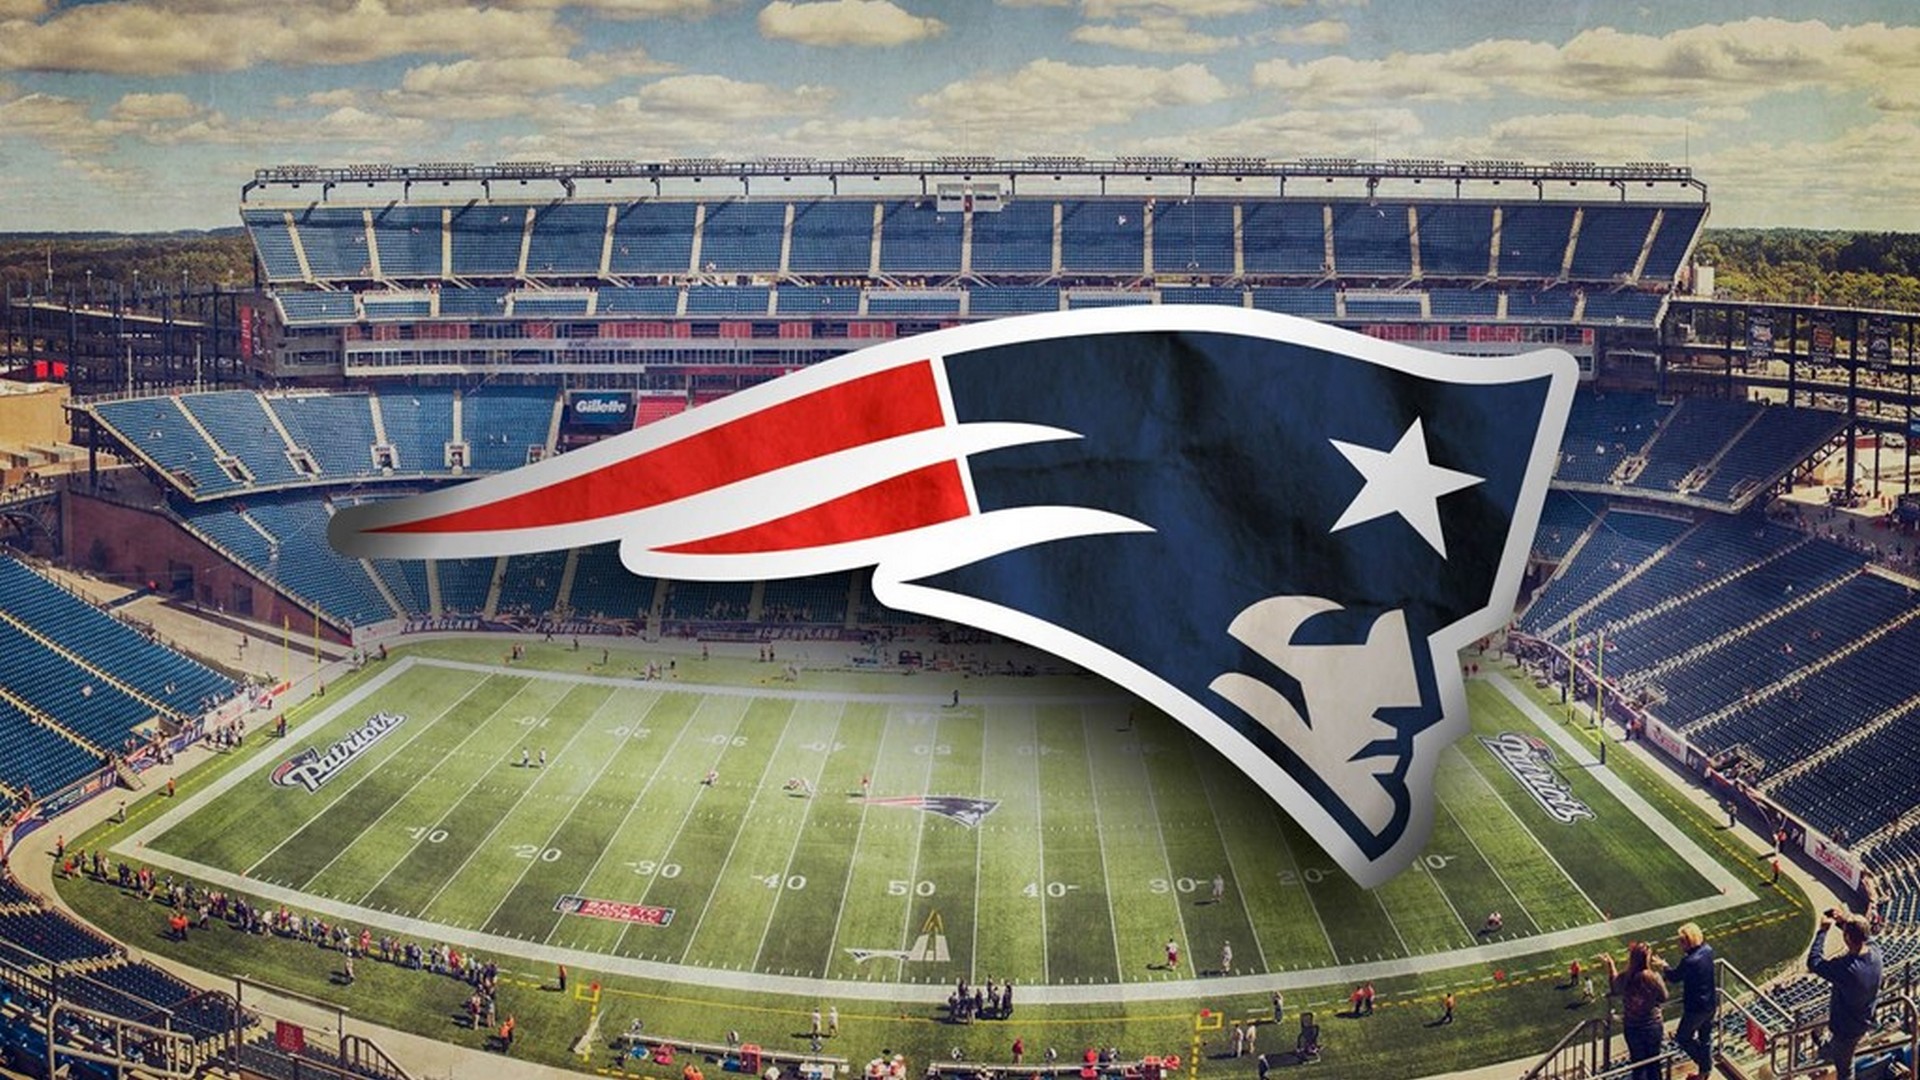 Wallpaper Desktop New England Patriots HD With Resolution 1920X1080 pixel. You can make this wallpaper for your Mac or Windows Desktop Background, iPhone, Android or Tablet and another Smartphone device for free